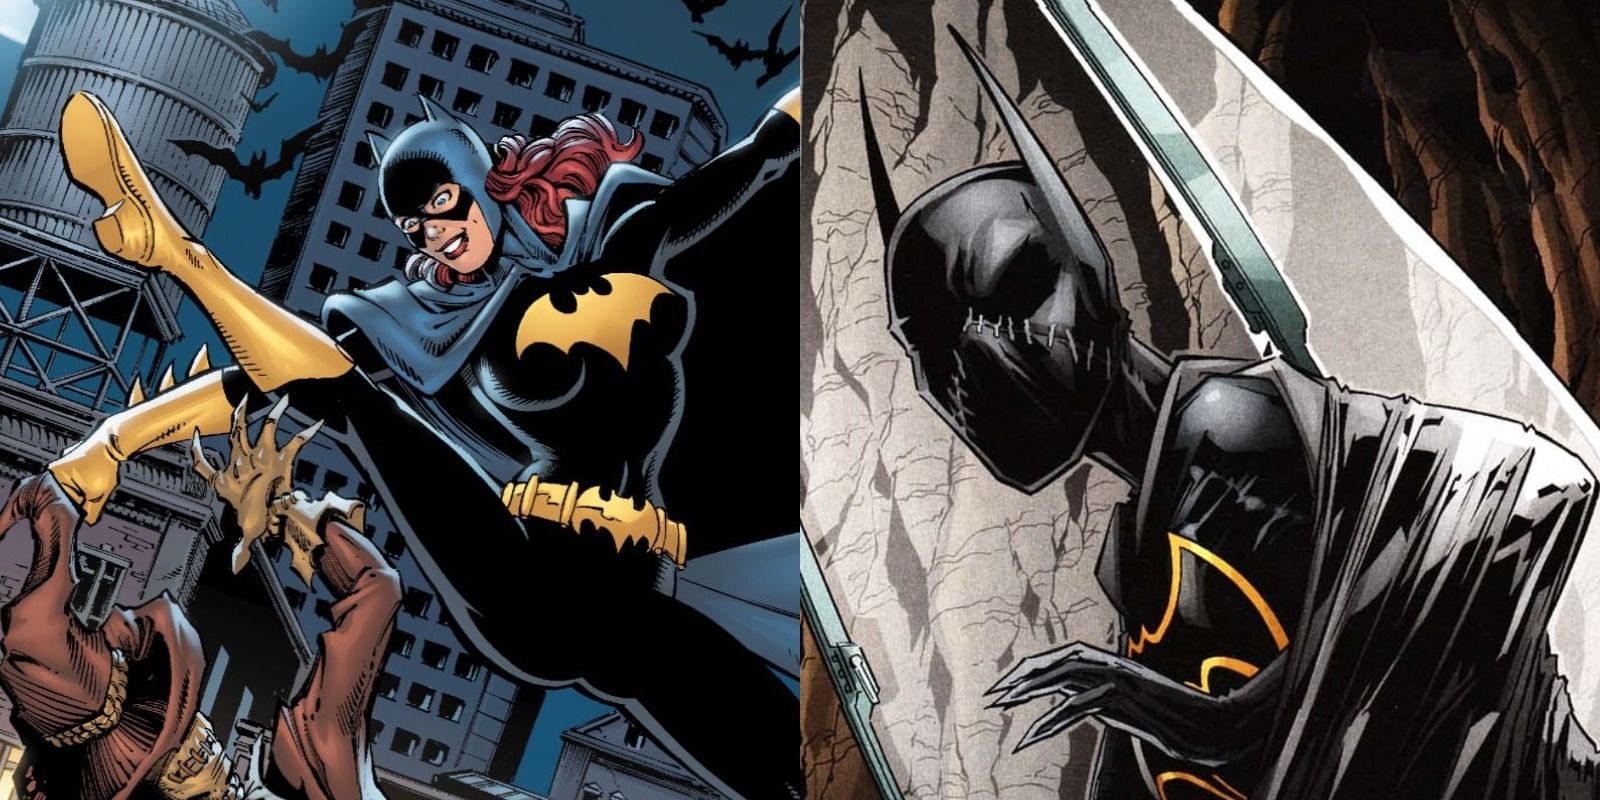 DC Comics: Every Batgirl, Ranked By Fighting Ability